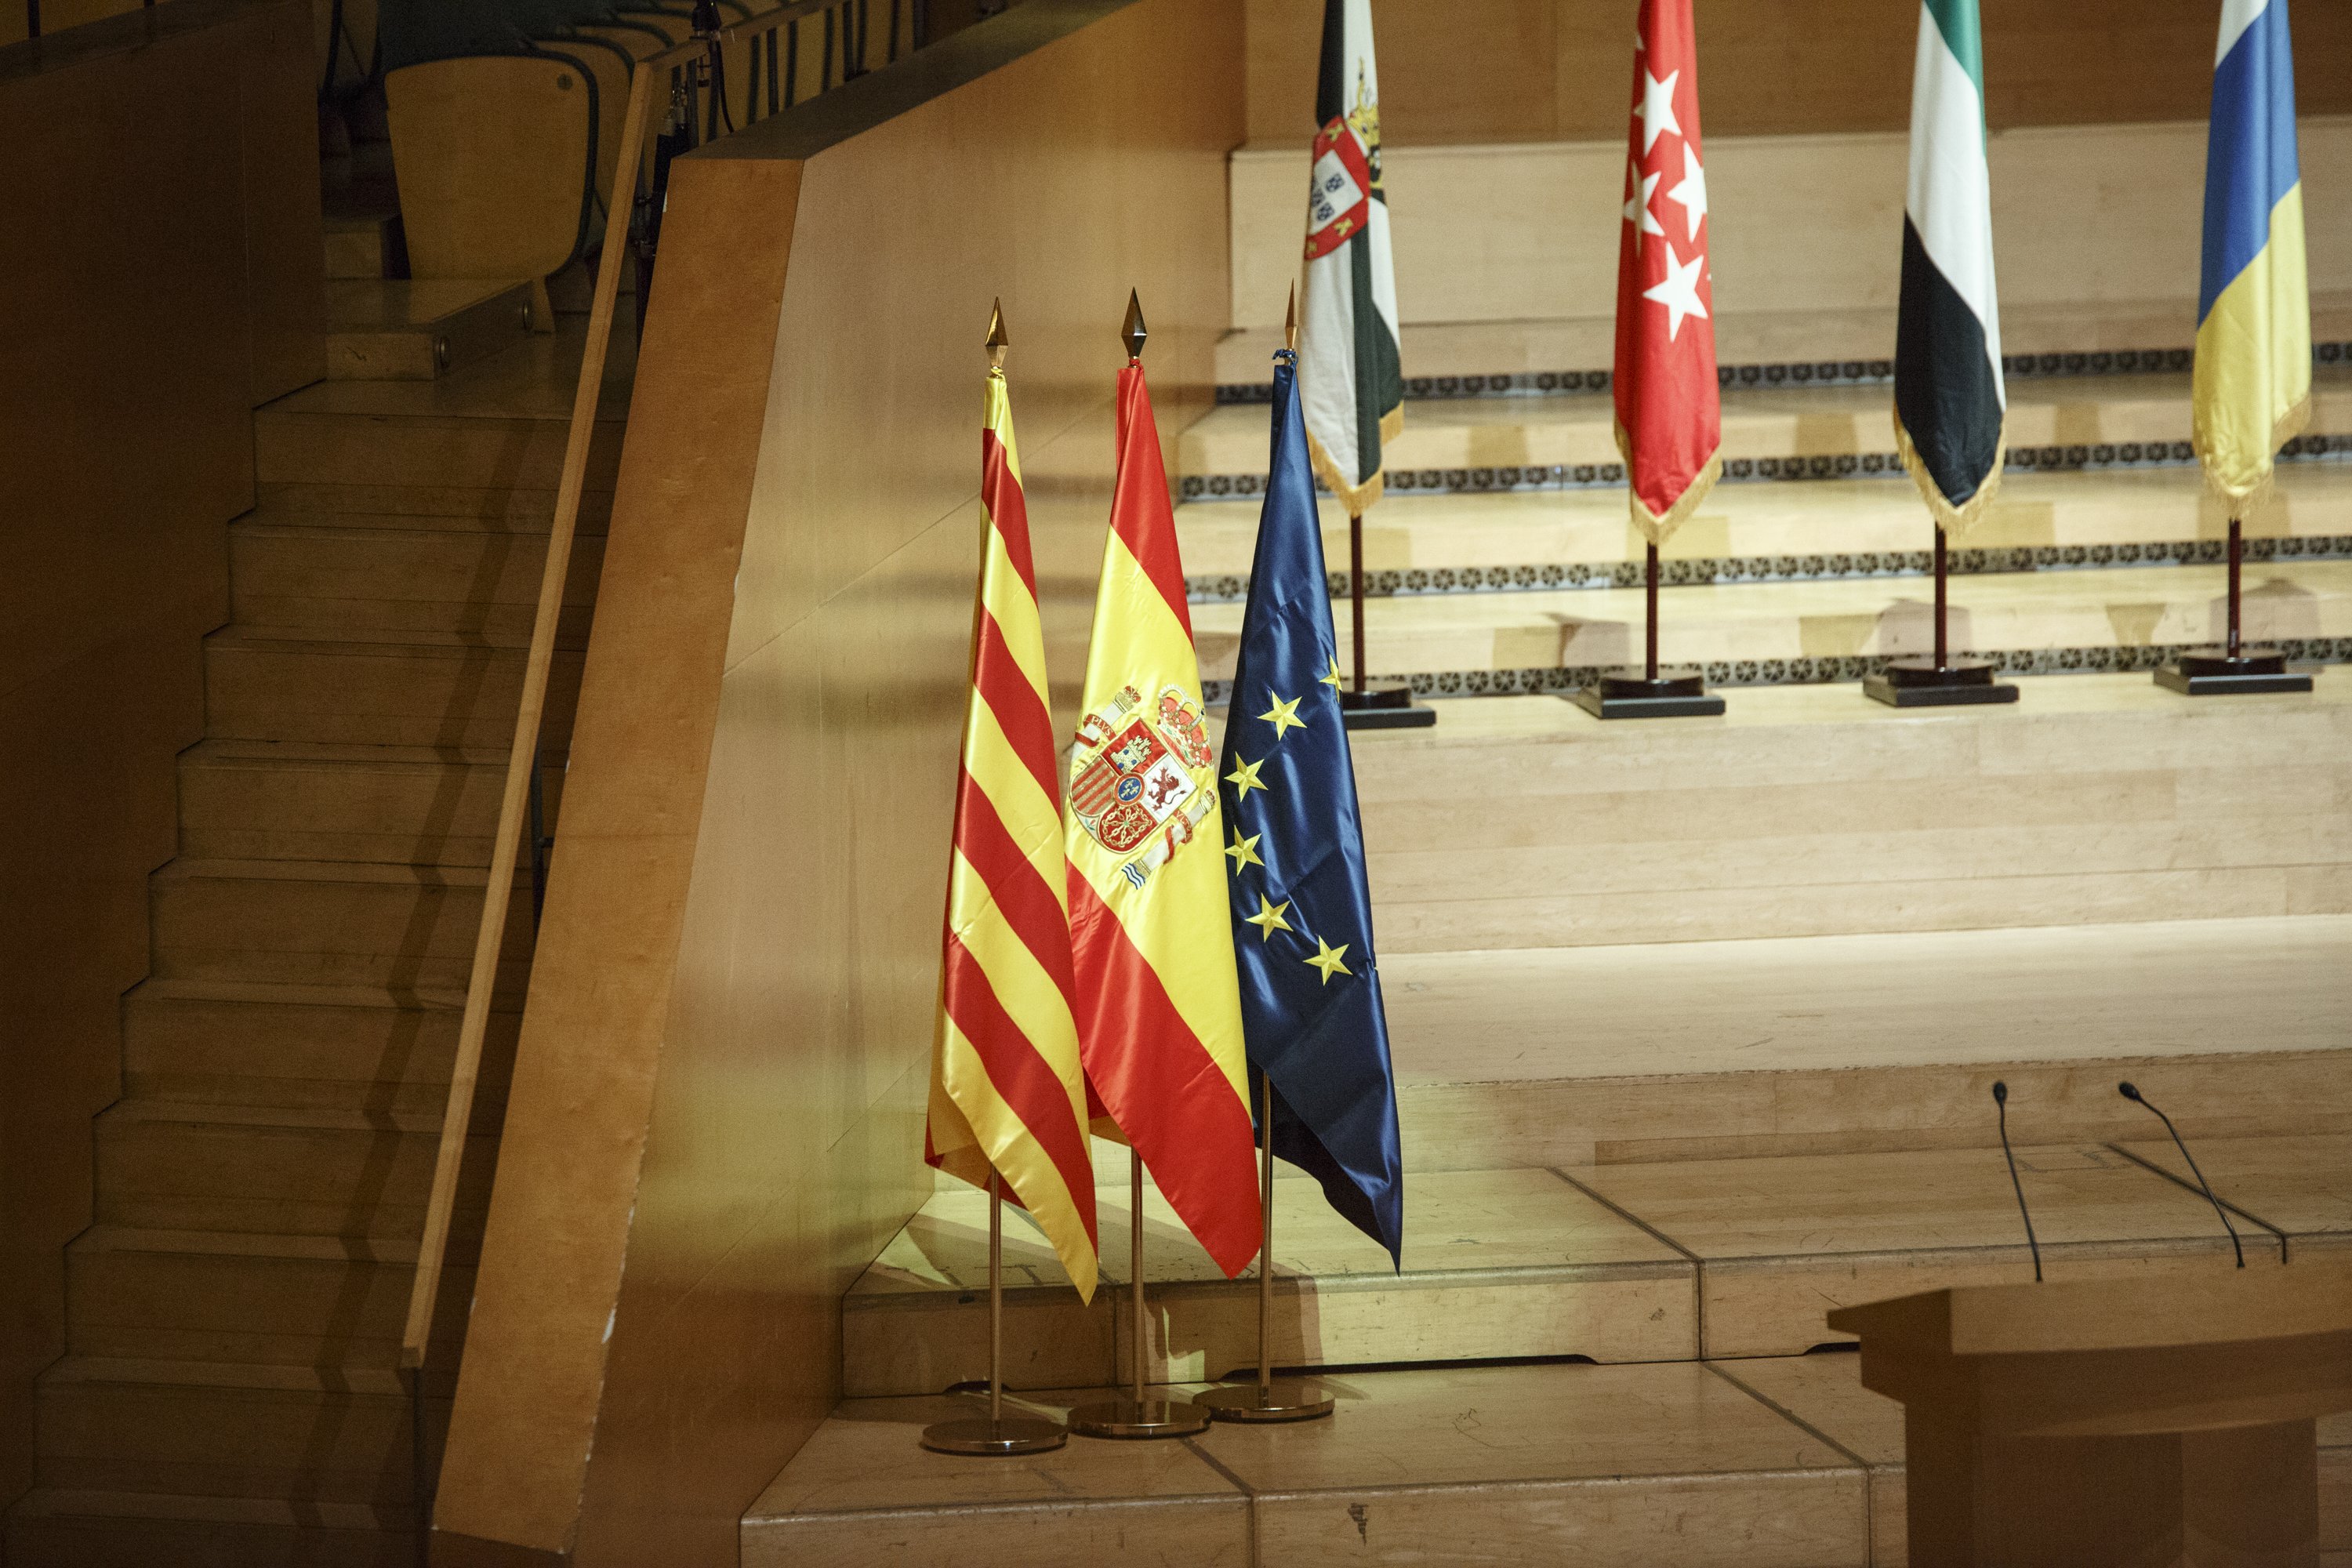 Repression has made Catalan issue a European-scale debate, says Liberty Nation